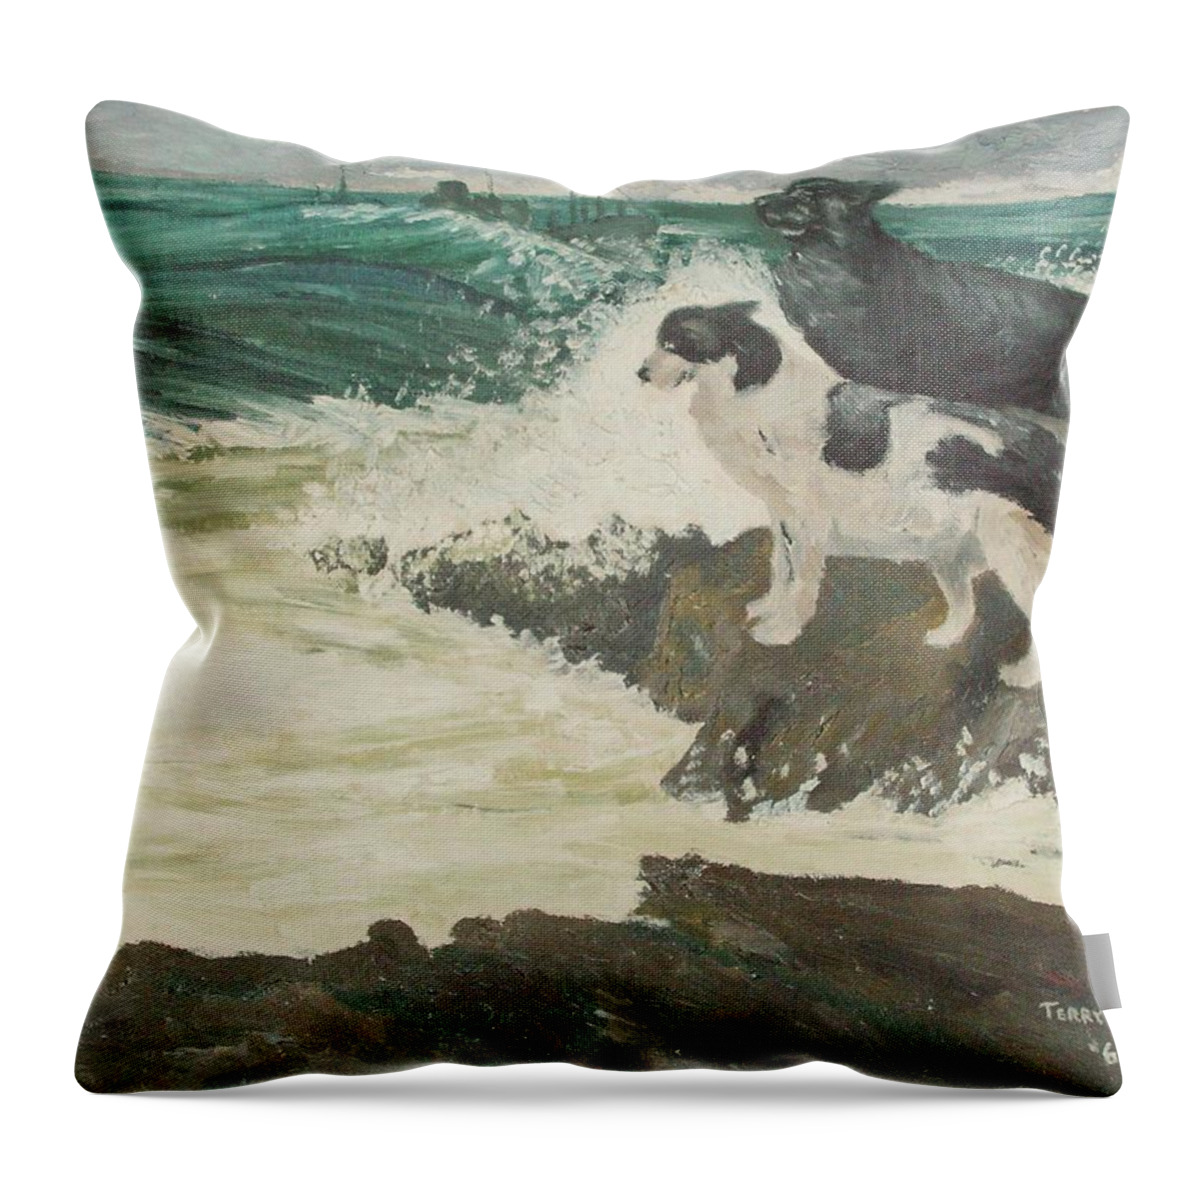 Wild Sea Throw Pillow featuring the painting RoughSea by Terry Frederick